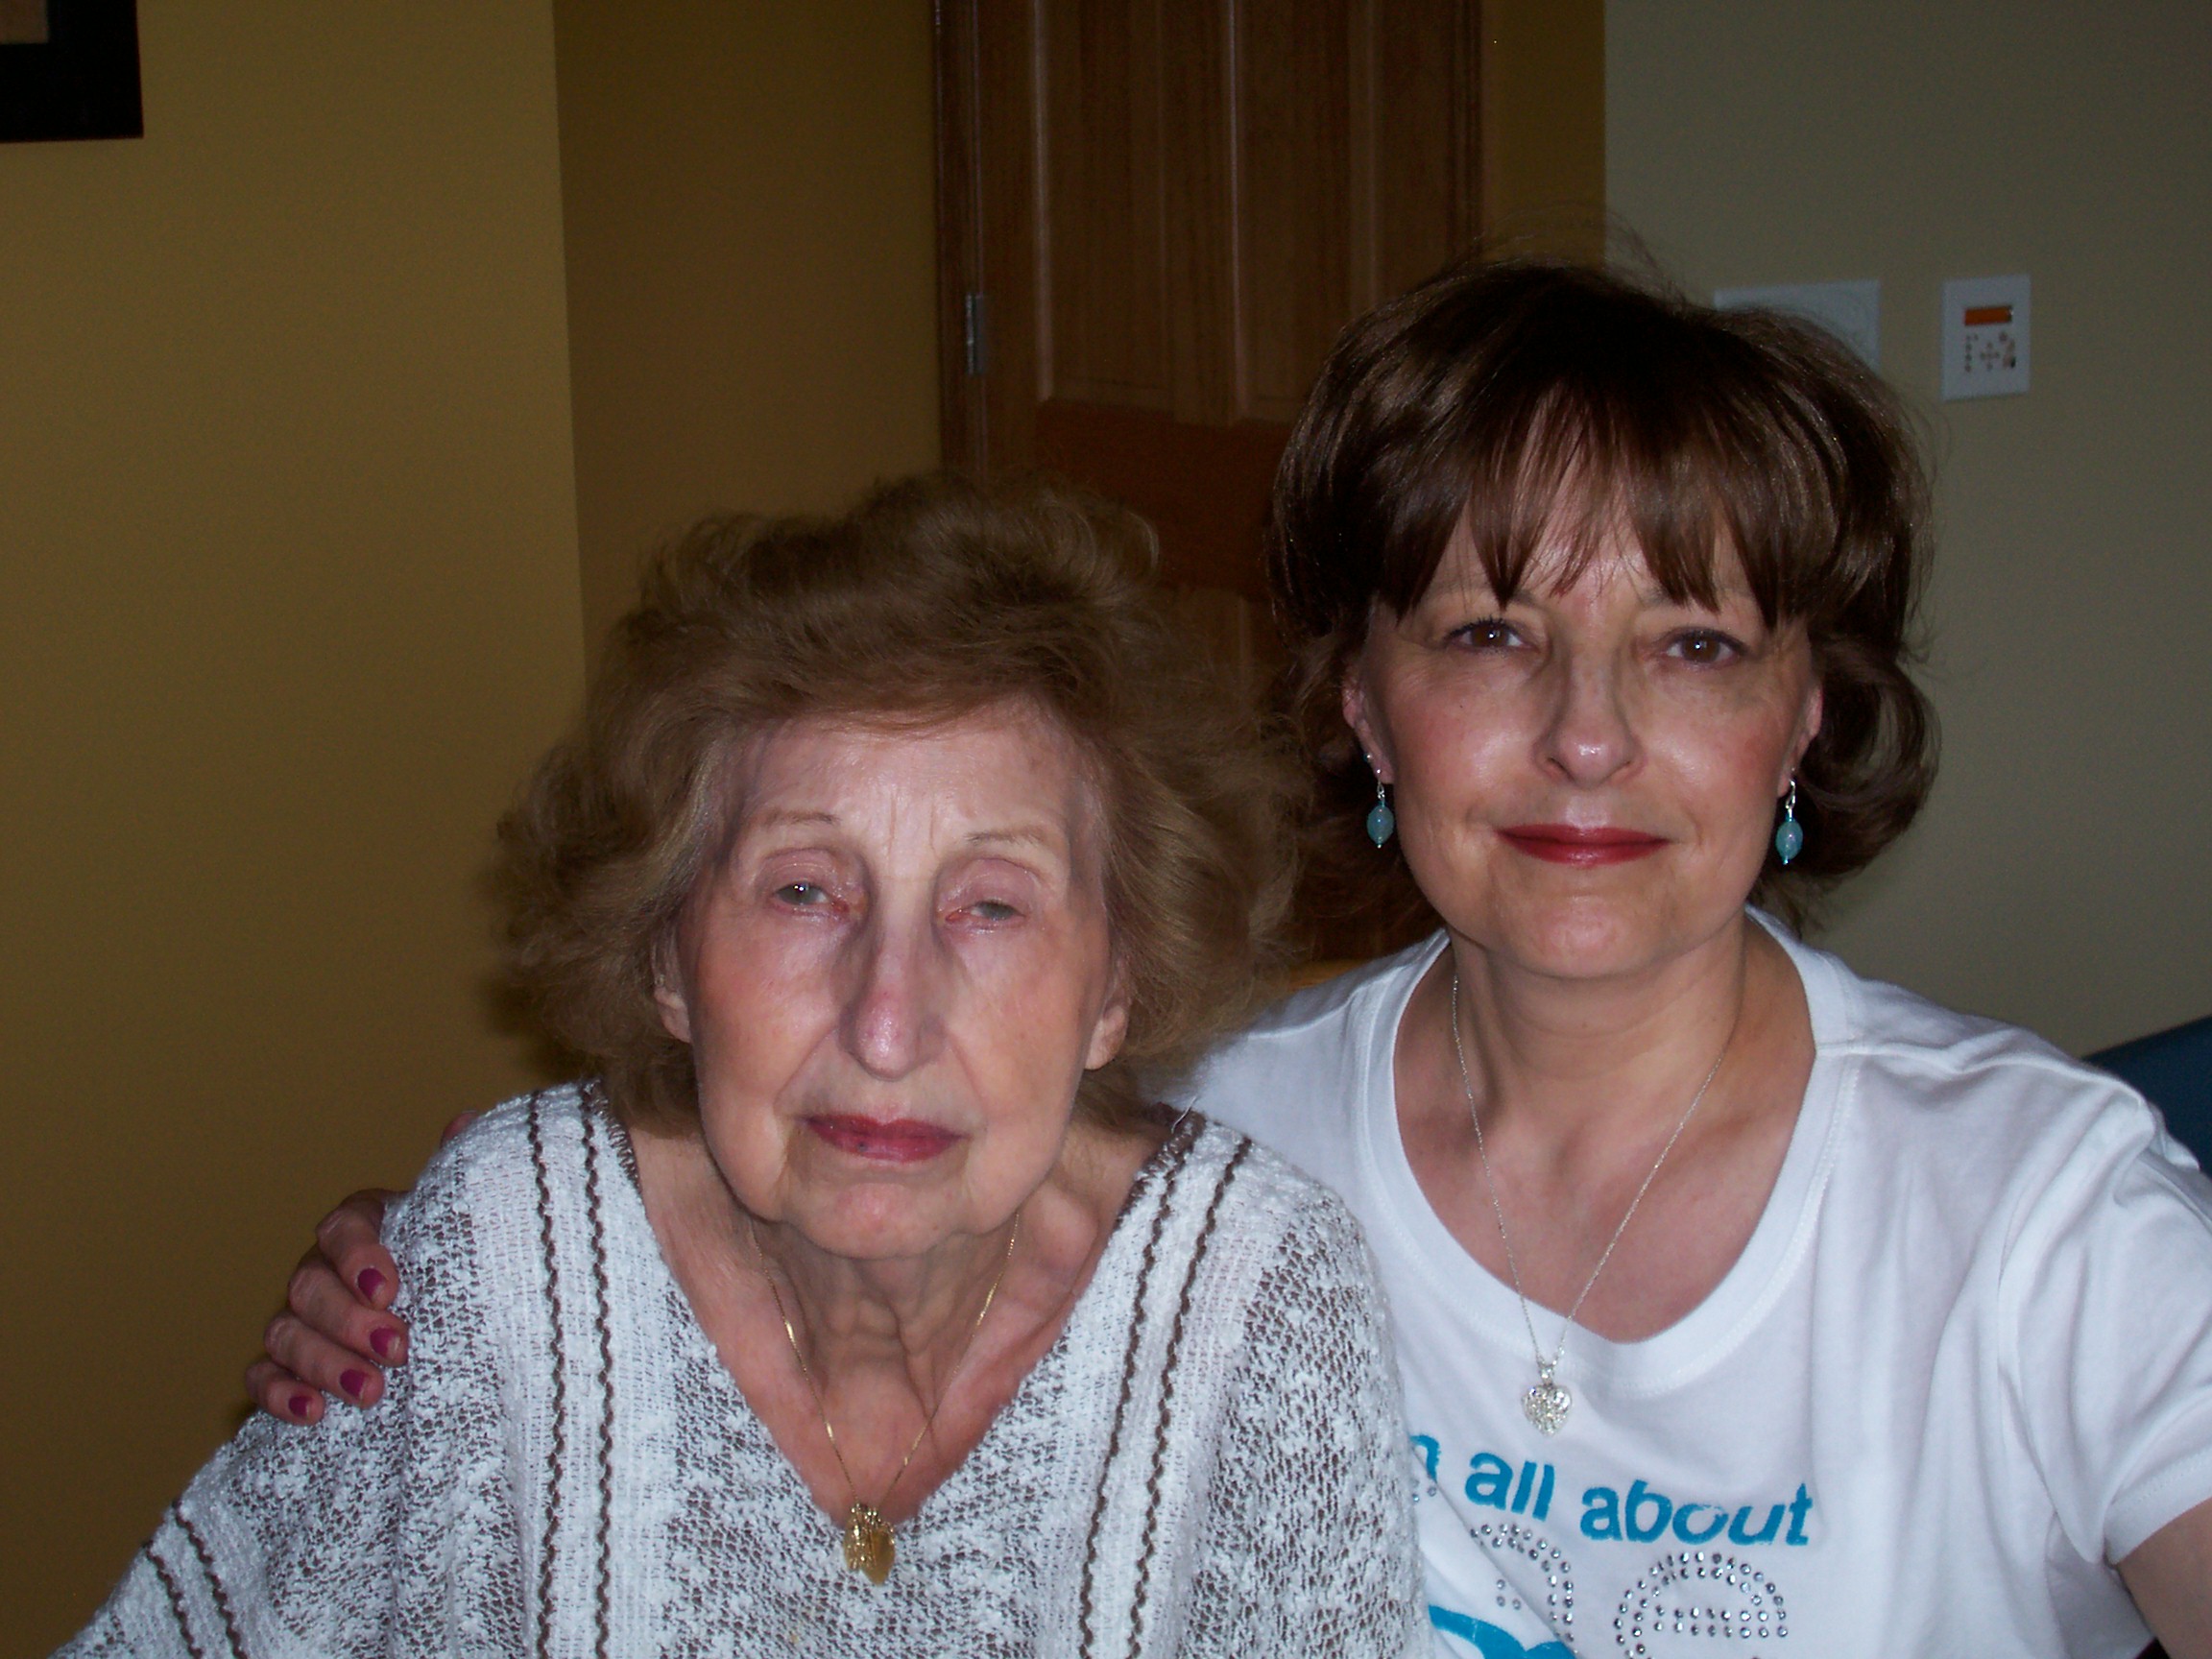 This is me an my mom - she is going to be 90 this year and doesn't look like someone that raised a daughter to be a thief.

I also have 2 kids that are in law enforcement.  One a sheriff's deputy in